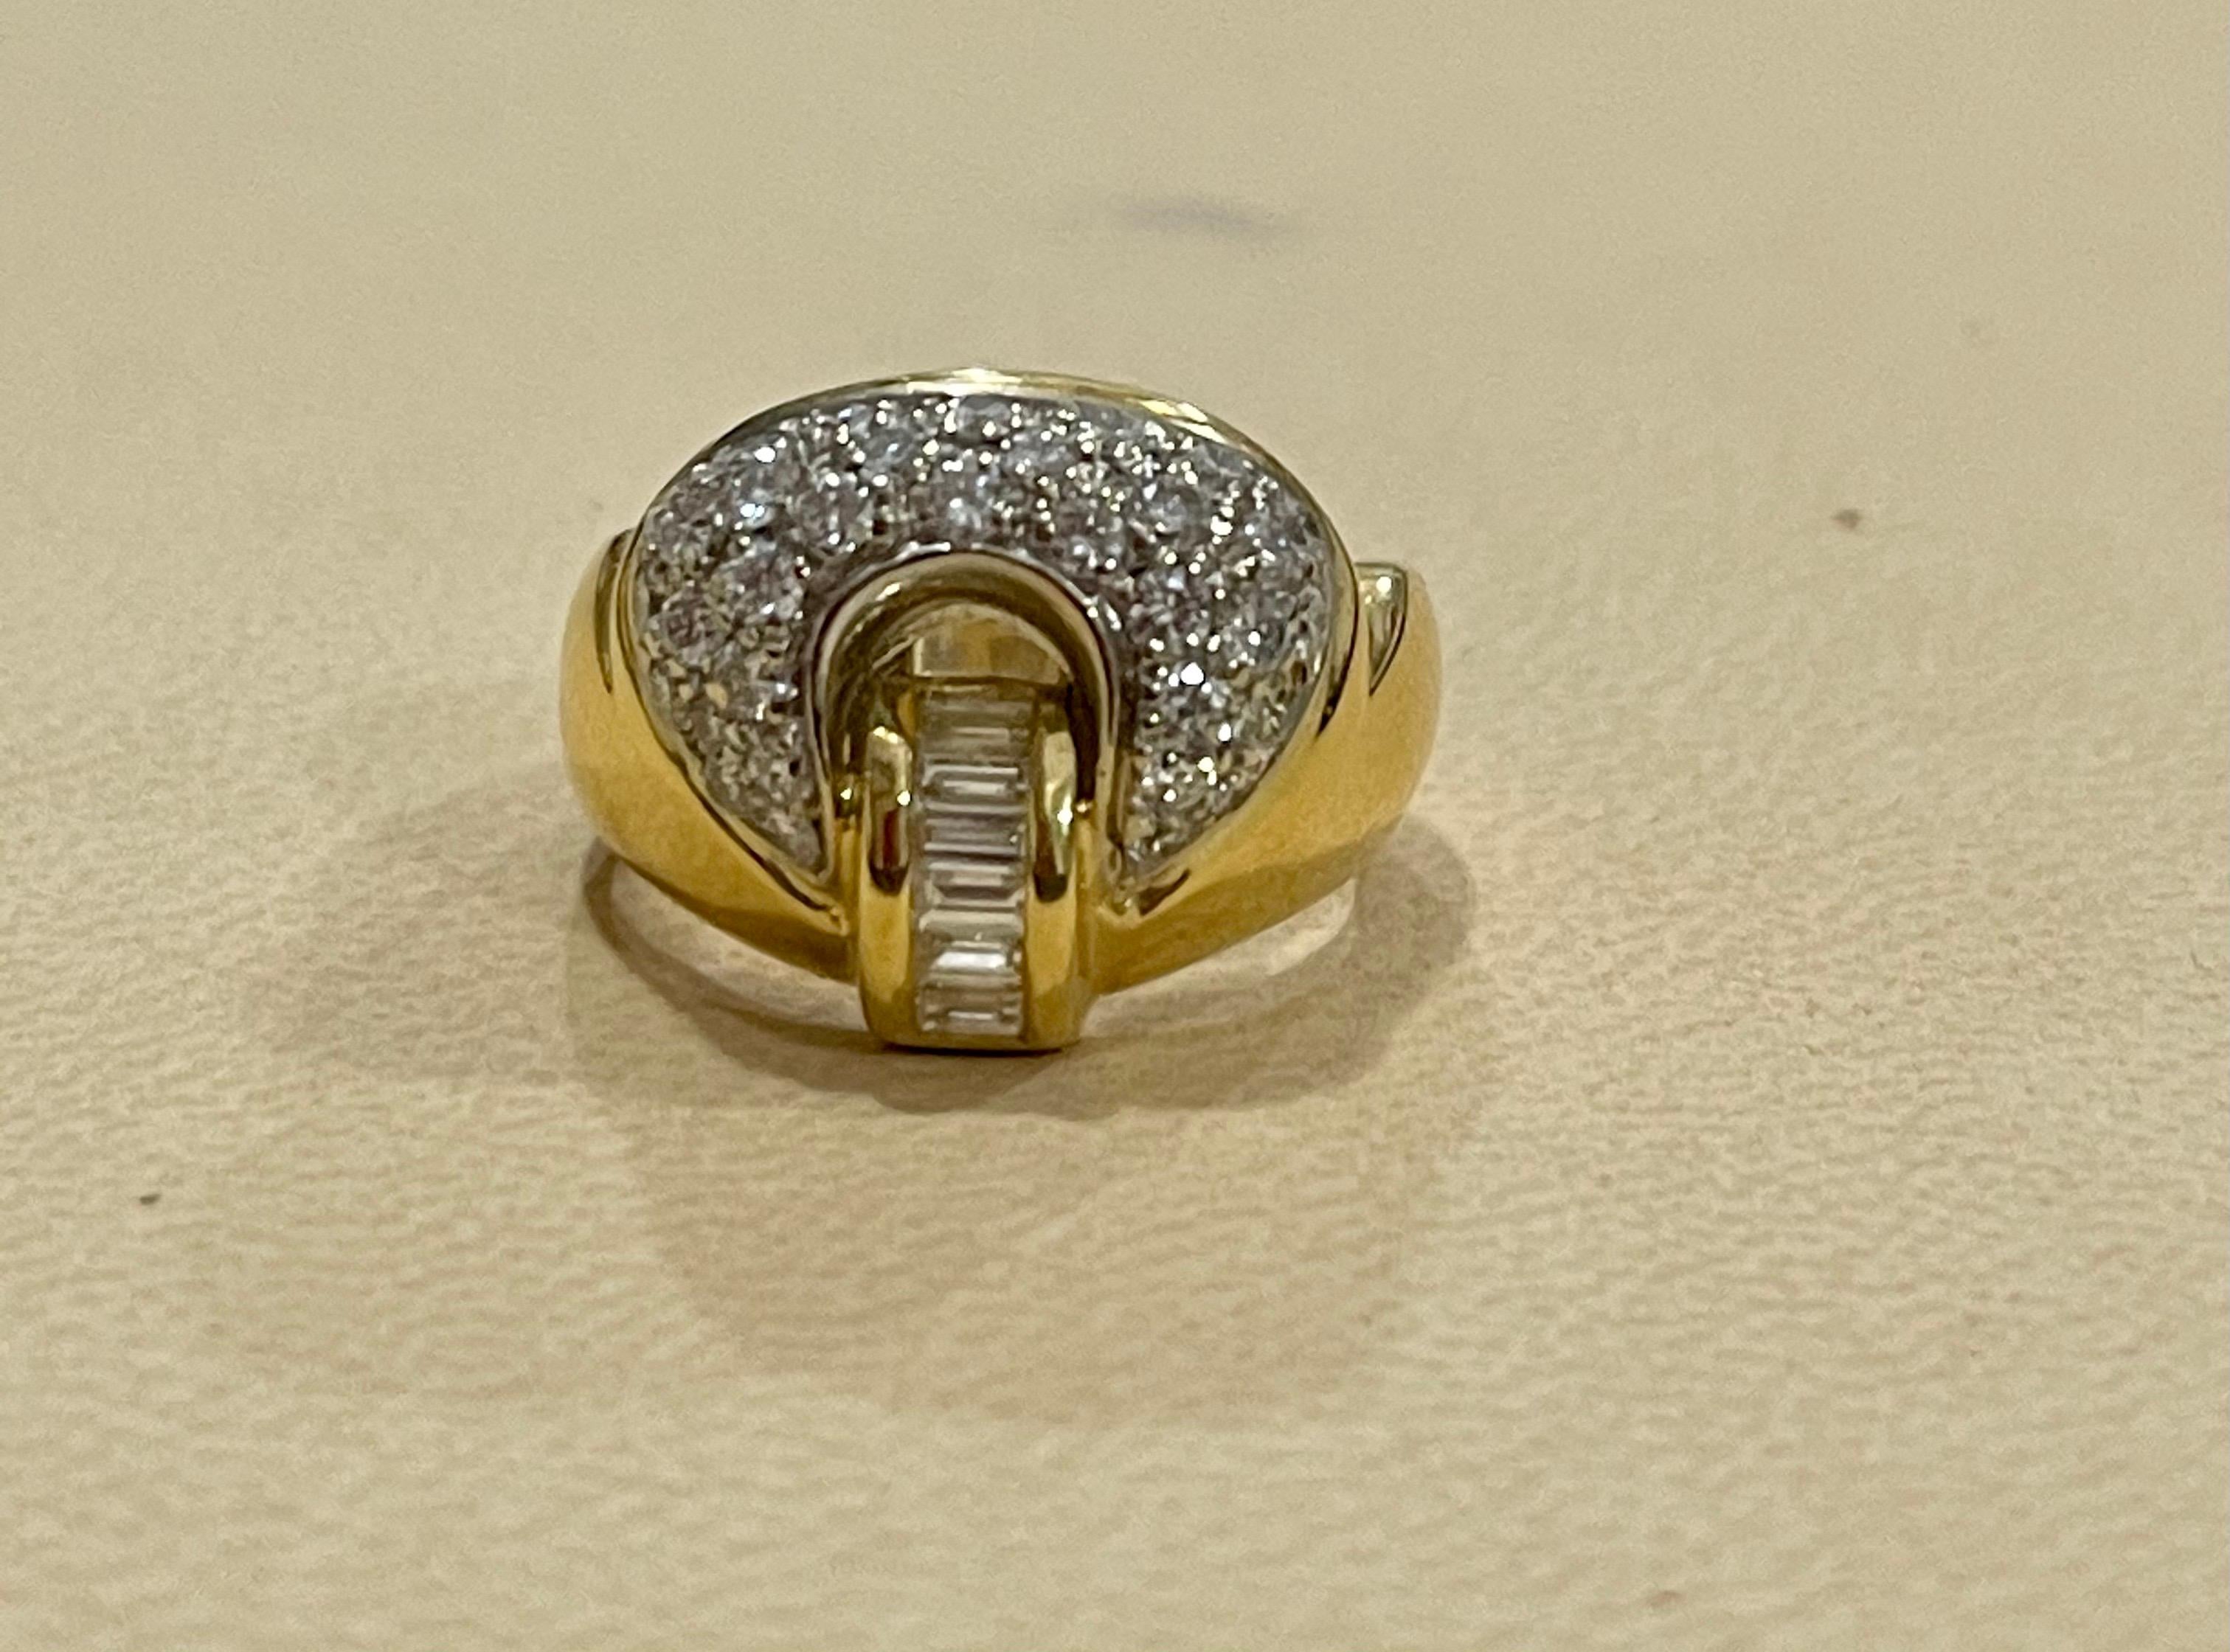 0.75 Carat Diamond Cocktail 18 Karat Yellow Gold Ring Size 4
18 K gold Stamped  9.2 Grams. Made in Italy
Diamond VS quality and G/H color.

There are  brilliant cut Round diamonds in the ring with few baguettes

Ring size is approximately  4 but can